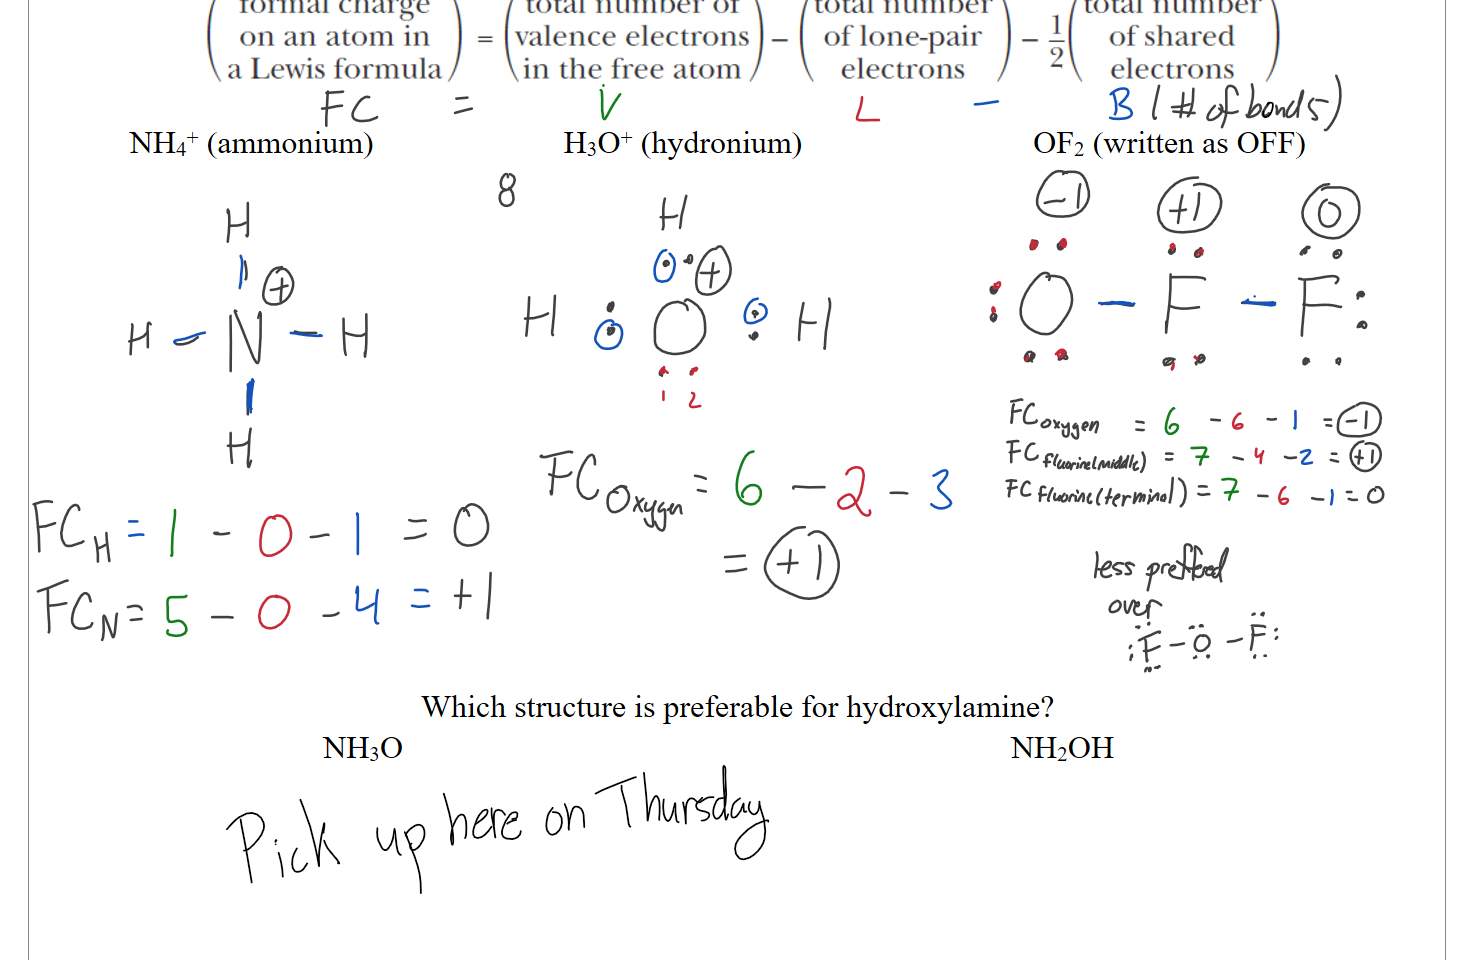 Untitled picture.png formal charge 
on an atom In 
a Lewis formula 
total number of 
= valence electrons 
in the free atom 
total number 
of lone-pair 
electrons 
total number 
of shared 
2 
electrons 

NH4+ (ammonium)










H3O+ (hydronium)
OF2 (written as OFF)





Which structure is preferable for hydroxylamine?
NH3O






NH2OH
Ink Drawings
Ink Drawings
Ink Drawings
Ink Drawings
Ink Drawings
Ink Drawings
Ink Drawings
Ink Drawings
Ink Drawings
Ink Drawings
Ink Drawings
Ink Drawings
Ink Drawings
Ink Drawings
Ink Drawings
Ink Drawings
Ink Drawings
Ink Drawings
Ink Drawings
Ink Drawings
Ink Drawings
Ink Drawings
Ink Drawings
Ink Drawings
Ink Drawings
Ink Drawings
Ink Drawings
Ink Drawings
Ink Drawings
Ink Drawings
Ink Drawings
Ink Drawings
Ink Drawings
Ink Drawings
Ink Drawings
Ink Drawings
Ink Drawings
Ink Drawings
Ink Drawings
Ink Drawings
Ink Drawings
Ink Drawings
Ink Drawings
Ink Drawings
Ink Drawings
Ink Drawings
Ink Drawings
Ink Drawings
Ink Drawings
Ink Drawings
Ink Drawings
Ink Drawings
Ink Drawings
Ink Drawings
Ink Drawings
Ink Drawings
Ink Drawings
Ink Drawings
Ink Drawings
Ink Drawings
Ink Drawings
Ink Drawings
Ink Drawings
Ink Drawings
Ink Drawings
Ink Drawings
Ink Drawings
Ink Drawings
Ink Drawings
Ink Drawings
Ink Drawings
Ink Drawings
Ink Drawings
Ink Drawings
Ink Drawings
Ink Drawings
Ink Drawings
Ink Drawings
Ink Drawings
Ink Drawings
Ink Drawings
Ink Drawings
Ink Drawings
Ink Drawings
Ink Drawings
Ink Drawings
Ink Drawings
Ink Drawings
Ink Drawings
Ink Drawings
Ink Drawings
Ink Drawings
Ink Drawings
Ink Drawings
Ink Drawings
Ink Drawings
Ink Drawings
Ink Drawings
Ink Drawings
Ink Drawings
Ink Drawings
Ink Drawings
Ink Drawings
Ink Drawings
Ink Drawings
Ink Drawings
Ink Drawings
Ink Drawings
Ink Drawings
Ink Drawings
Ink Drawings
Ink Drawings
Ink Drawings
Ink Drawings
Ink Drawings
Ink Drawings
Ink Drawings
Ink Drawings
Ink Drawings
Ink Drawings
Ink Drawings
Ink Drawings
Ink Drawings
Ink Drawings
Ink Drawings
Ink Drawings
Ink Drawings
Ink Drawings
Ink Drawings
Ink Drawings
Ink Drawings
Ink Drawings
Ink Drawings
Ink Drawings
Ink Drawings
Ink Drawings
Ink Drawings
Ink Drawings
Ink Drawings
Ink Drawings
Ink Drawings
Ink Drawings
Ink Drawings
Ink Drawings
Ink Drawings
Ink Drawings
Ink Drawings
Ink Drawings
Ink Drawings
Ink Drawings
Ink Drawings
Ink Drawings
Ink Drawings
Ink Drawings
Ink Drawings
Ink Drawings
Ink Drawings
Ink Drawings
Ink Drawings
Ink Drawings
Ink Drawings
Ink Drawings
Ink Drawings
Ink Drawings
Ink Drawings
Ink Drawings
Ink Drawings
Ink Drawings
Ink Drawings
Ink Drawings
Ink Drawings
Ink Drawings
Ink Drawings
Ink Drawings
Ink Drawings
Ink Drawings
Ink Drawings
Ink Drawings
Ink Drawings
Ink Drawings
Ink Drawings
Ink Drawings
Ink Drawings
Ink Drawings
Ink Drawings
Ink Drawings
Ink Drawings
Ink Drawings
Ink Drawings
Ink Drawings
Ink Drawings
Ink Drawings
Ink Drawings
Ink Drawings
Ink Drawings
Ink Drawings
Ink Drawings
Ink Drawings
Ink Drawings
Ink Drawings
Ink Drawings
Ink Drawings
Ink Drawings
Ink Drawings
Ink Drawings
Ink Drawings
Ink Drawings
Ink Drawings
Ink Drawings
Ink Drawings
Ink Drawings
Ink Drawings
Ink Drawings
Ink Drawings
Ink Drawings
Ink Drawings
Ink Drawings
Ink Drawings
Ink Drawings
Ink Drawings
Ink Drawings
Ink Drawings
Ink Drawings
Ink Drawings
Ink Drawings
Ink Drawings
Ink Drawings
Ink Drawings
Ink Drawings
Ink Drawings
Ink Drawings
Ink Drawings
Ink Drawings
Ink Drawings
Ink Drawings
Ink Drawings
Ink Drawings
Ink Drawings
Ink Drawings
Ink Drawings
Ink Drawings
Ink Drawings
Ink Drawings
Ink Drawings
Ink Drawings
Ink Drawings
Ink Drawings
Ink Drawings
Ink Drawings
Ink Drawings
Ink Drawings
Ink Drawings
Ink Drawings
Ink Drawings
Ink Drawings
Ink Drawings
Ink Drawings
Ink Drawings
Ink Drawings
Ink Drawings
Ink Drawings
Ink Drawings
Ink Drawings
Ink Drawings
Ink Drawings
Ink Drawings
Ink Drawings
Ink Drawings
Ink Drawings
Ink Drawings
Ink Drawings
Ink Drawings
Ink Drawings
Ink Drawings
Ink Drawings
Ink Drawings
Ink Drawings
Ink Drawings
Ink Drawings
Ink Drawings
Ink Drawings
Ink Drawings
Ink Drawings
Ink Drawings
Ink Drawings
Ink Drawings
Ink Drawings
Ink Drawings
Ink Drawings
Ink Drawings
Ink Drawings
Ink Drawings
Ink Drawings
Ink Drawings
Ink Drawings
Ink Drawings
Ink Drawings
Ink Drawings
Ink Drawings
Ink Drawings
Ink Drawings
Ink Drawings
Ink Drawings
Ink Drawings
Ink Drawings
Ink Drawings
Ink Drawings
Ink Drawings
Ink Drawings
Ink Drawings
Ink Drawings
Ink Drawings
Ink Drawings
Ink Drawings
Ink Drawings
Ink Drawings
Ink Drawings
Ink Drawings
Ink Drawings
Ink Drawings
Ink Drawings
Ink Drawings
Ink Drawings
Ink Drawings
Ink Drawings
Ink Drawings
Ink Drawings
Ink Drawings
Ink Drawings
Ink Drawings
Ink Drawings
Ink Drawings
Ink Drawings
Ink Drawings
Ink Drawings
Ink Drawings
Ink Drawings
Ink Drawings
Ink Drawings
Ink Drawings
Ink Drawings
Ink Drawings
Ink Drawings
Ink Drawings
Ink Drawings
Ink Drawings
Ink Drawings
Ink Drawings
Ink Drawings
Ink Drawings
Ink Drawings
Ink Drawings
Ink Drawings
Ink Drawings
Ink Drawings
Ink Drawings
Ink Drawings
Ink Drawings
Ink Drawings
Ink Drawings
Ink Drawings
Ink Drawings
Ink Drawings
Ink Drawings
Ink Drawings
Ink Drawings
Ink Drawings
Ink Drawings
